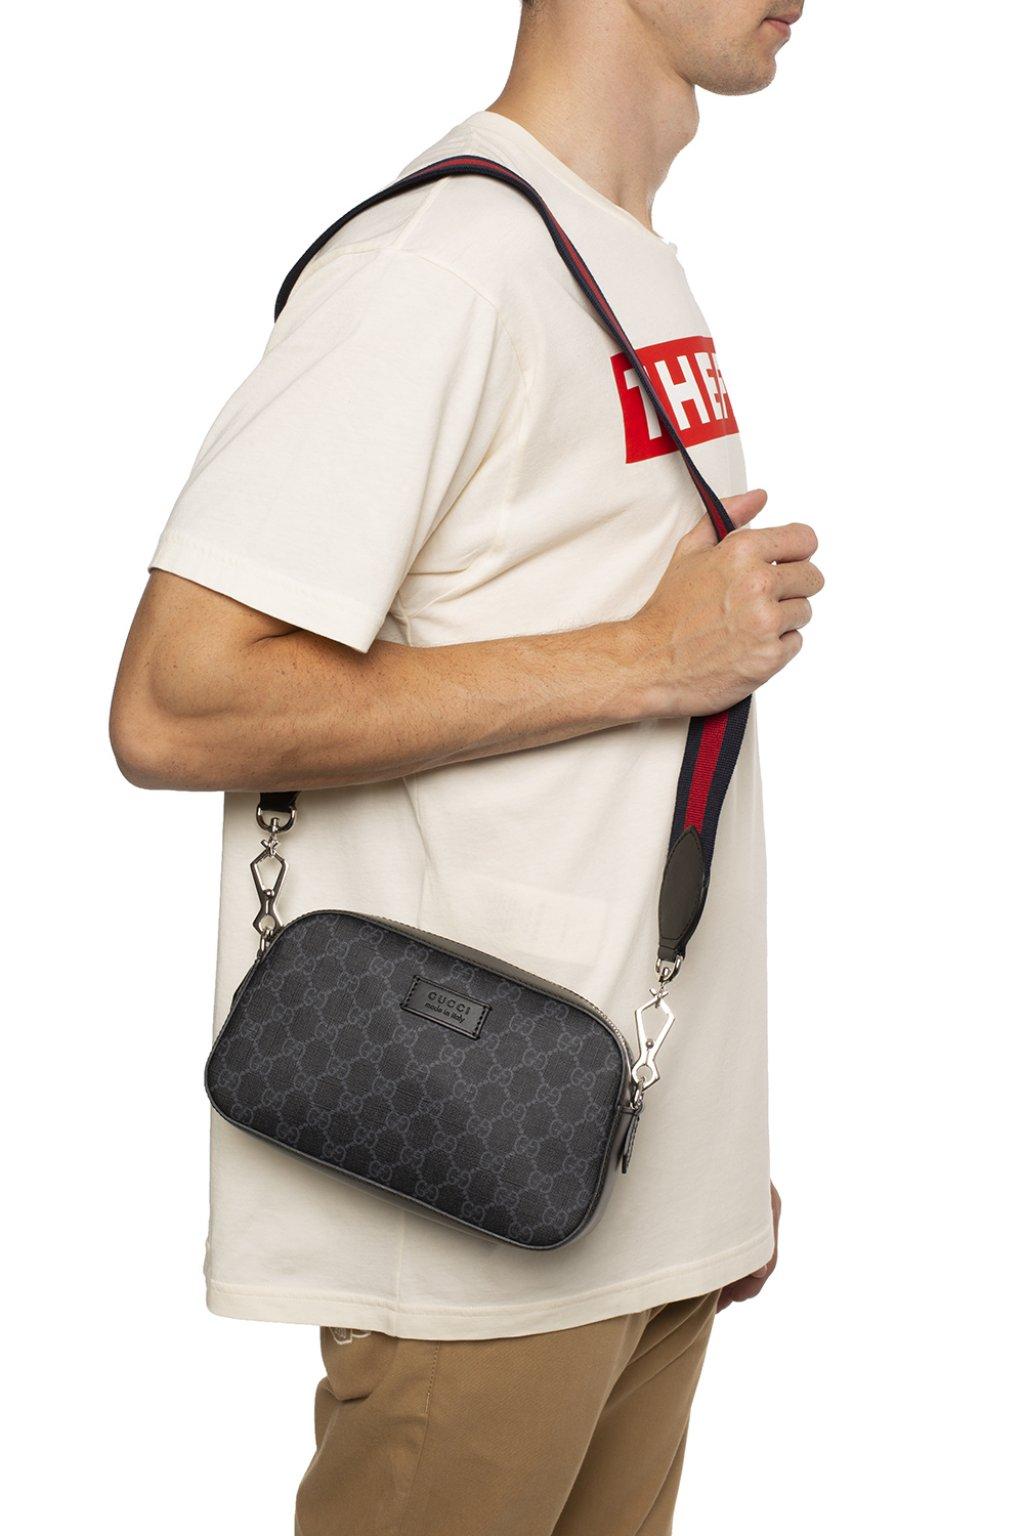 Gucci Gg-supreme Canvas Cross-body Bag in Black for Men - Save 15% - Lyst